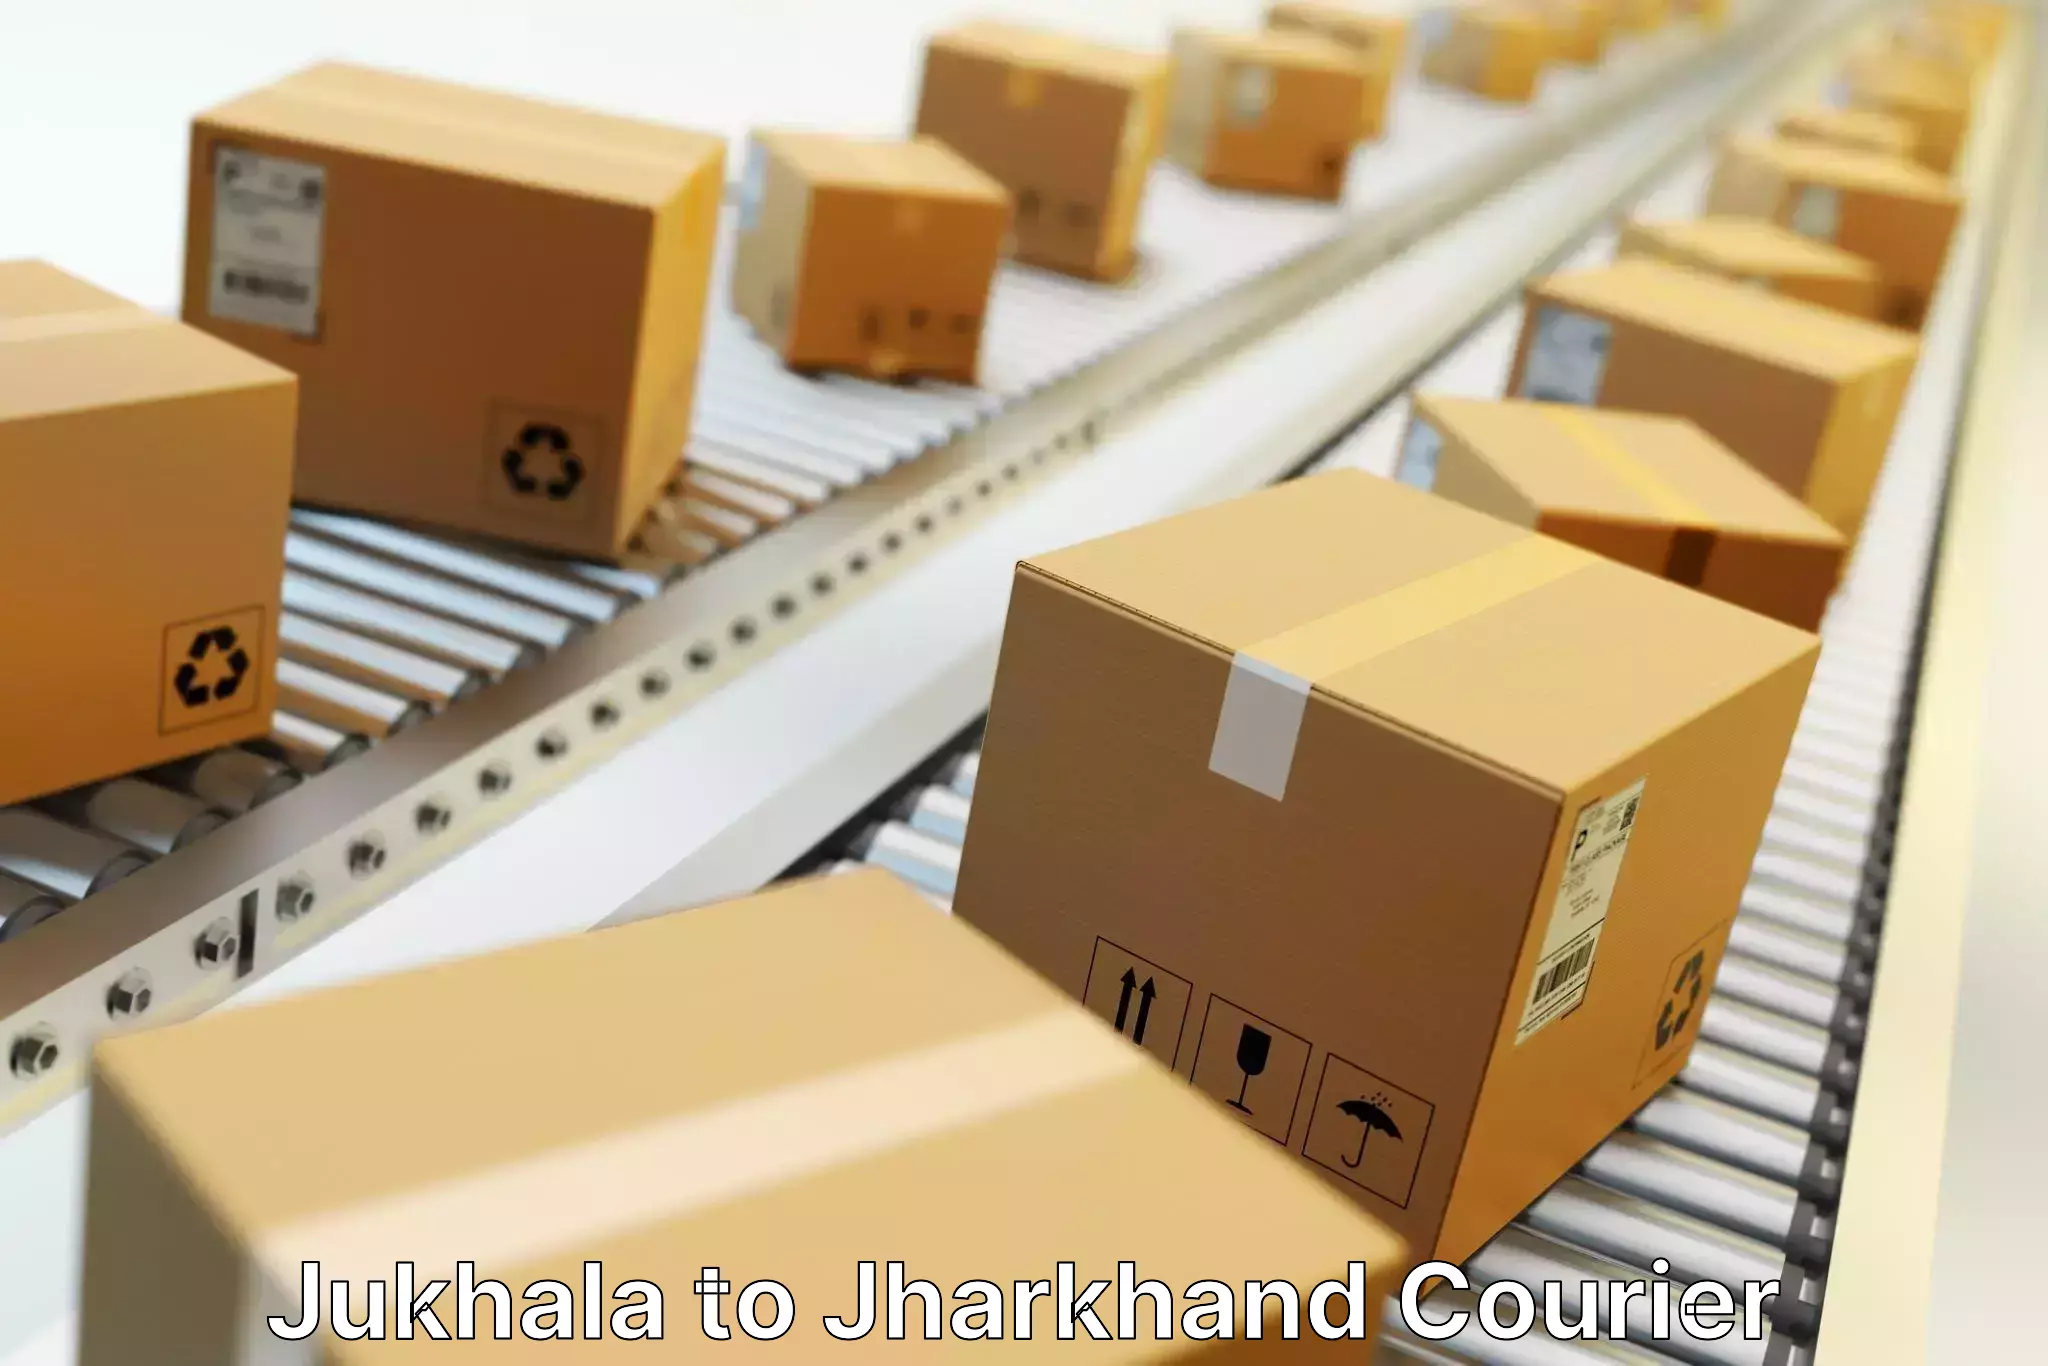 Reliable delivery network Jukhala to Kedla